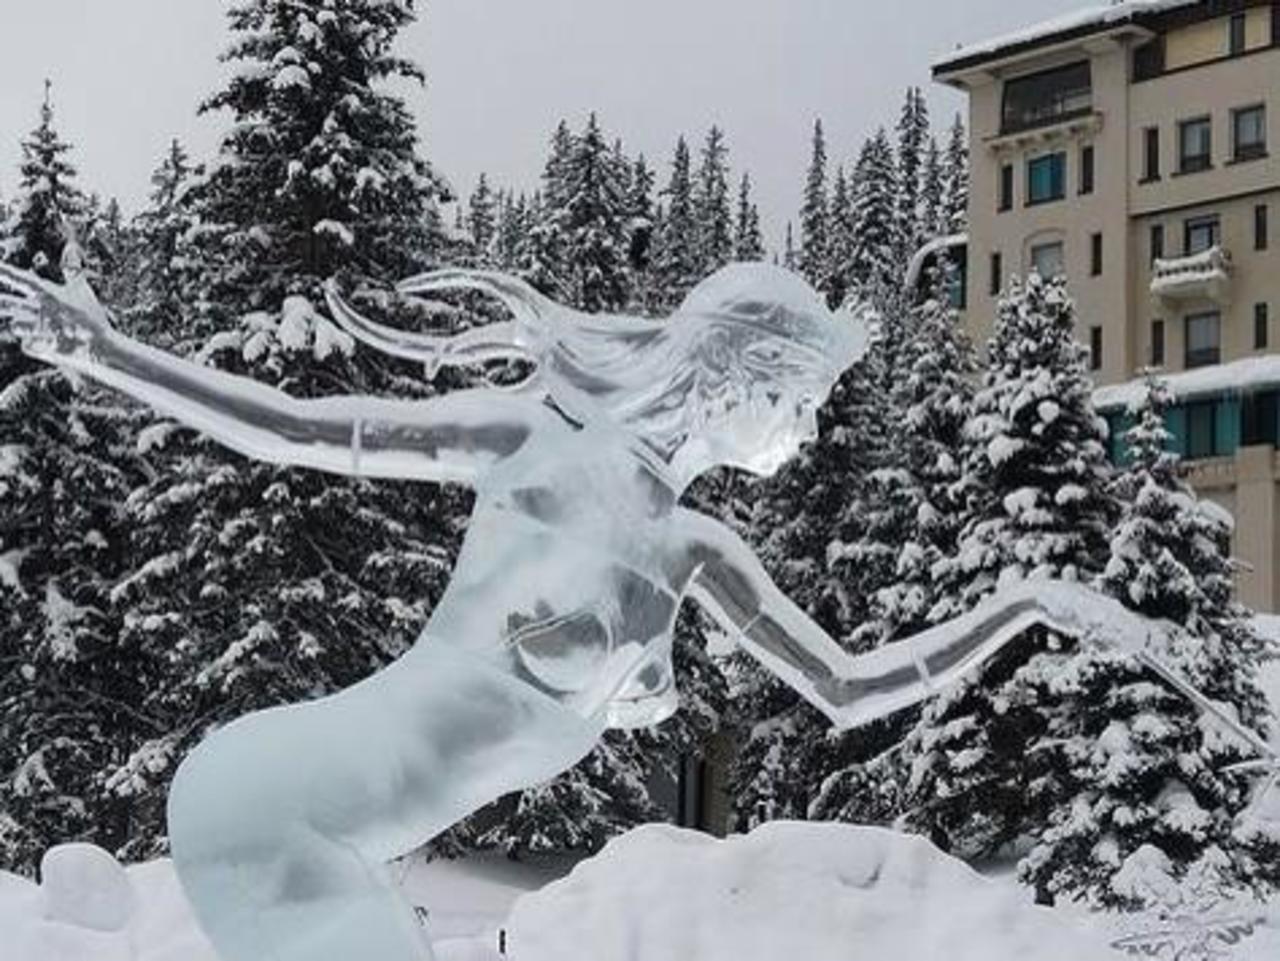 It's the time of year, amazing ice sculptures
http://xaxor.com/creative/16565-cool-ice-sculptures.html
#sculpture #ice #snow #art http://t.co/fusZPTqbBZ